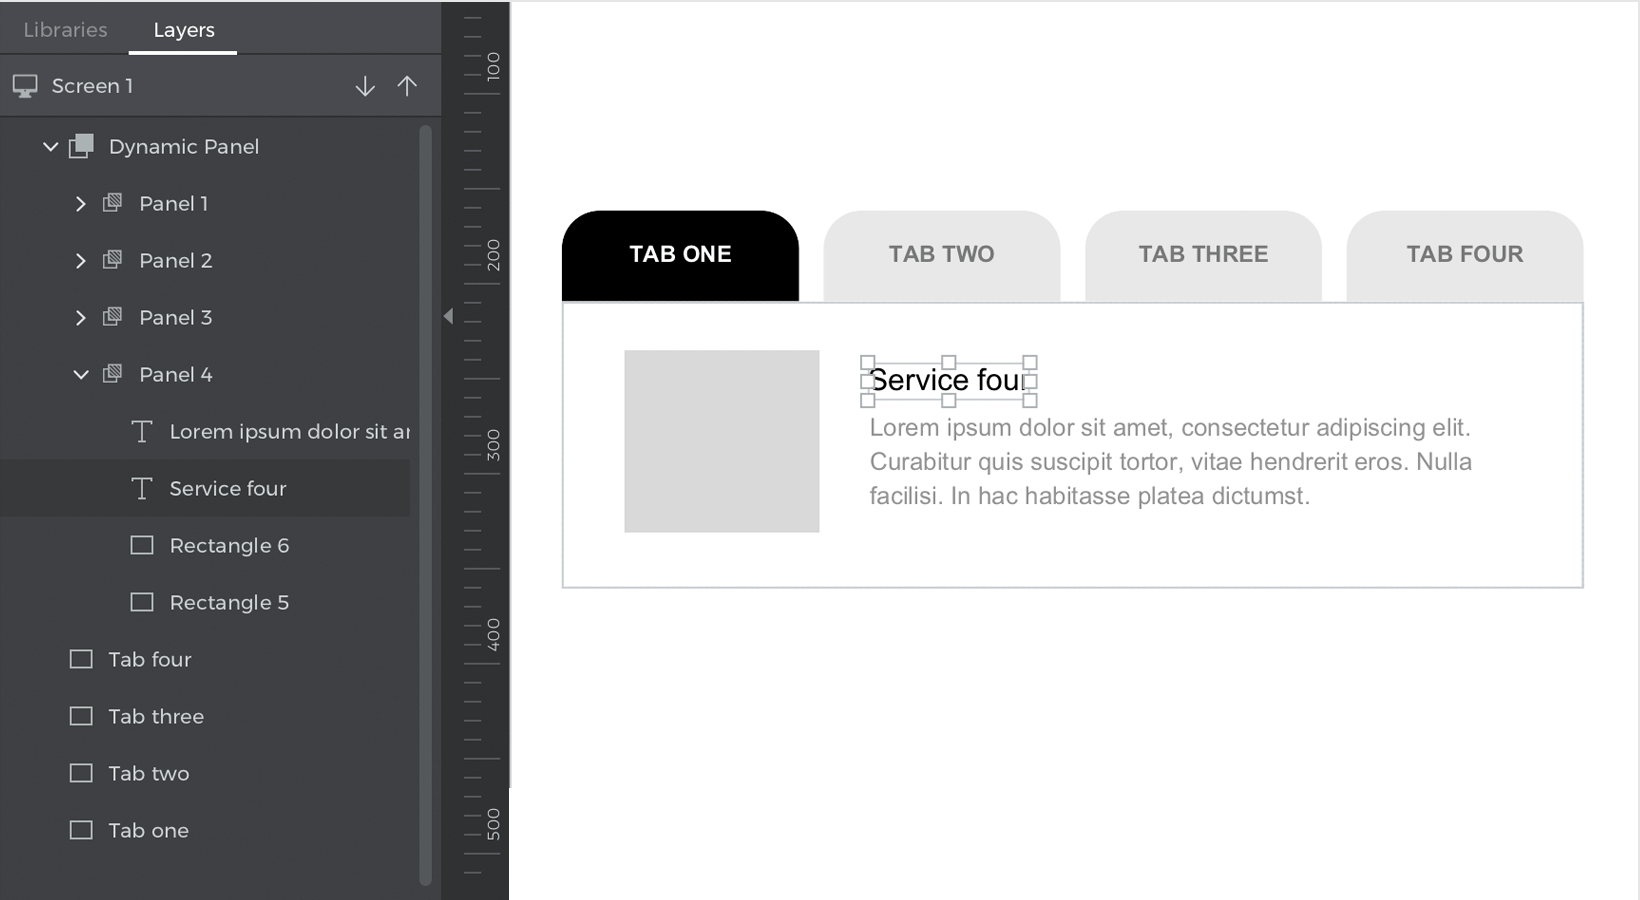 Duplicate the panel three times and customize the content inside